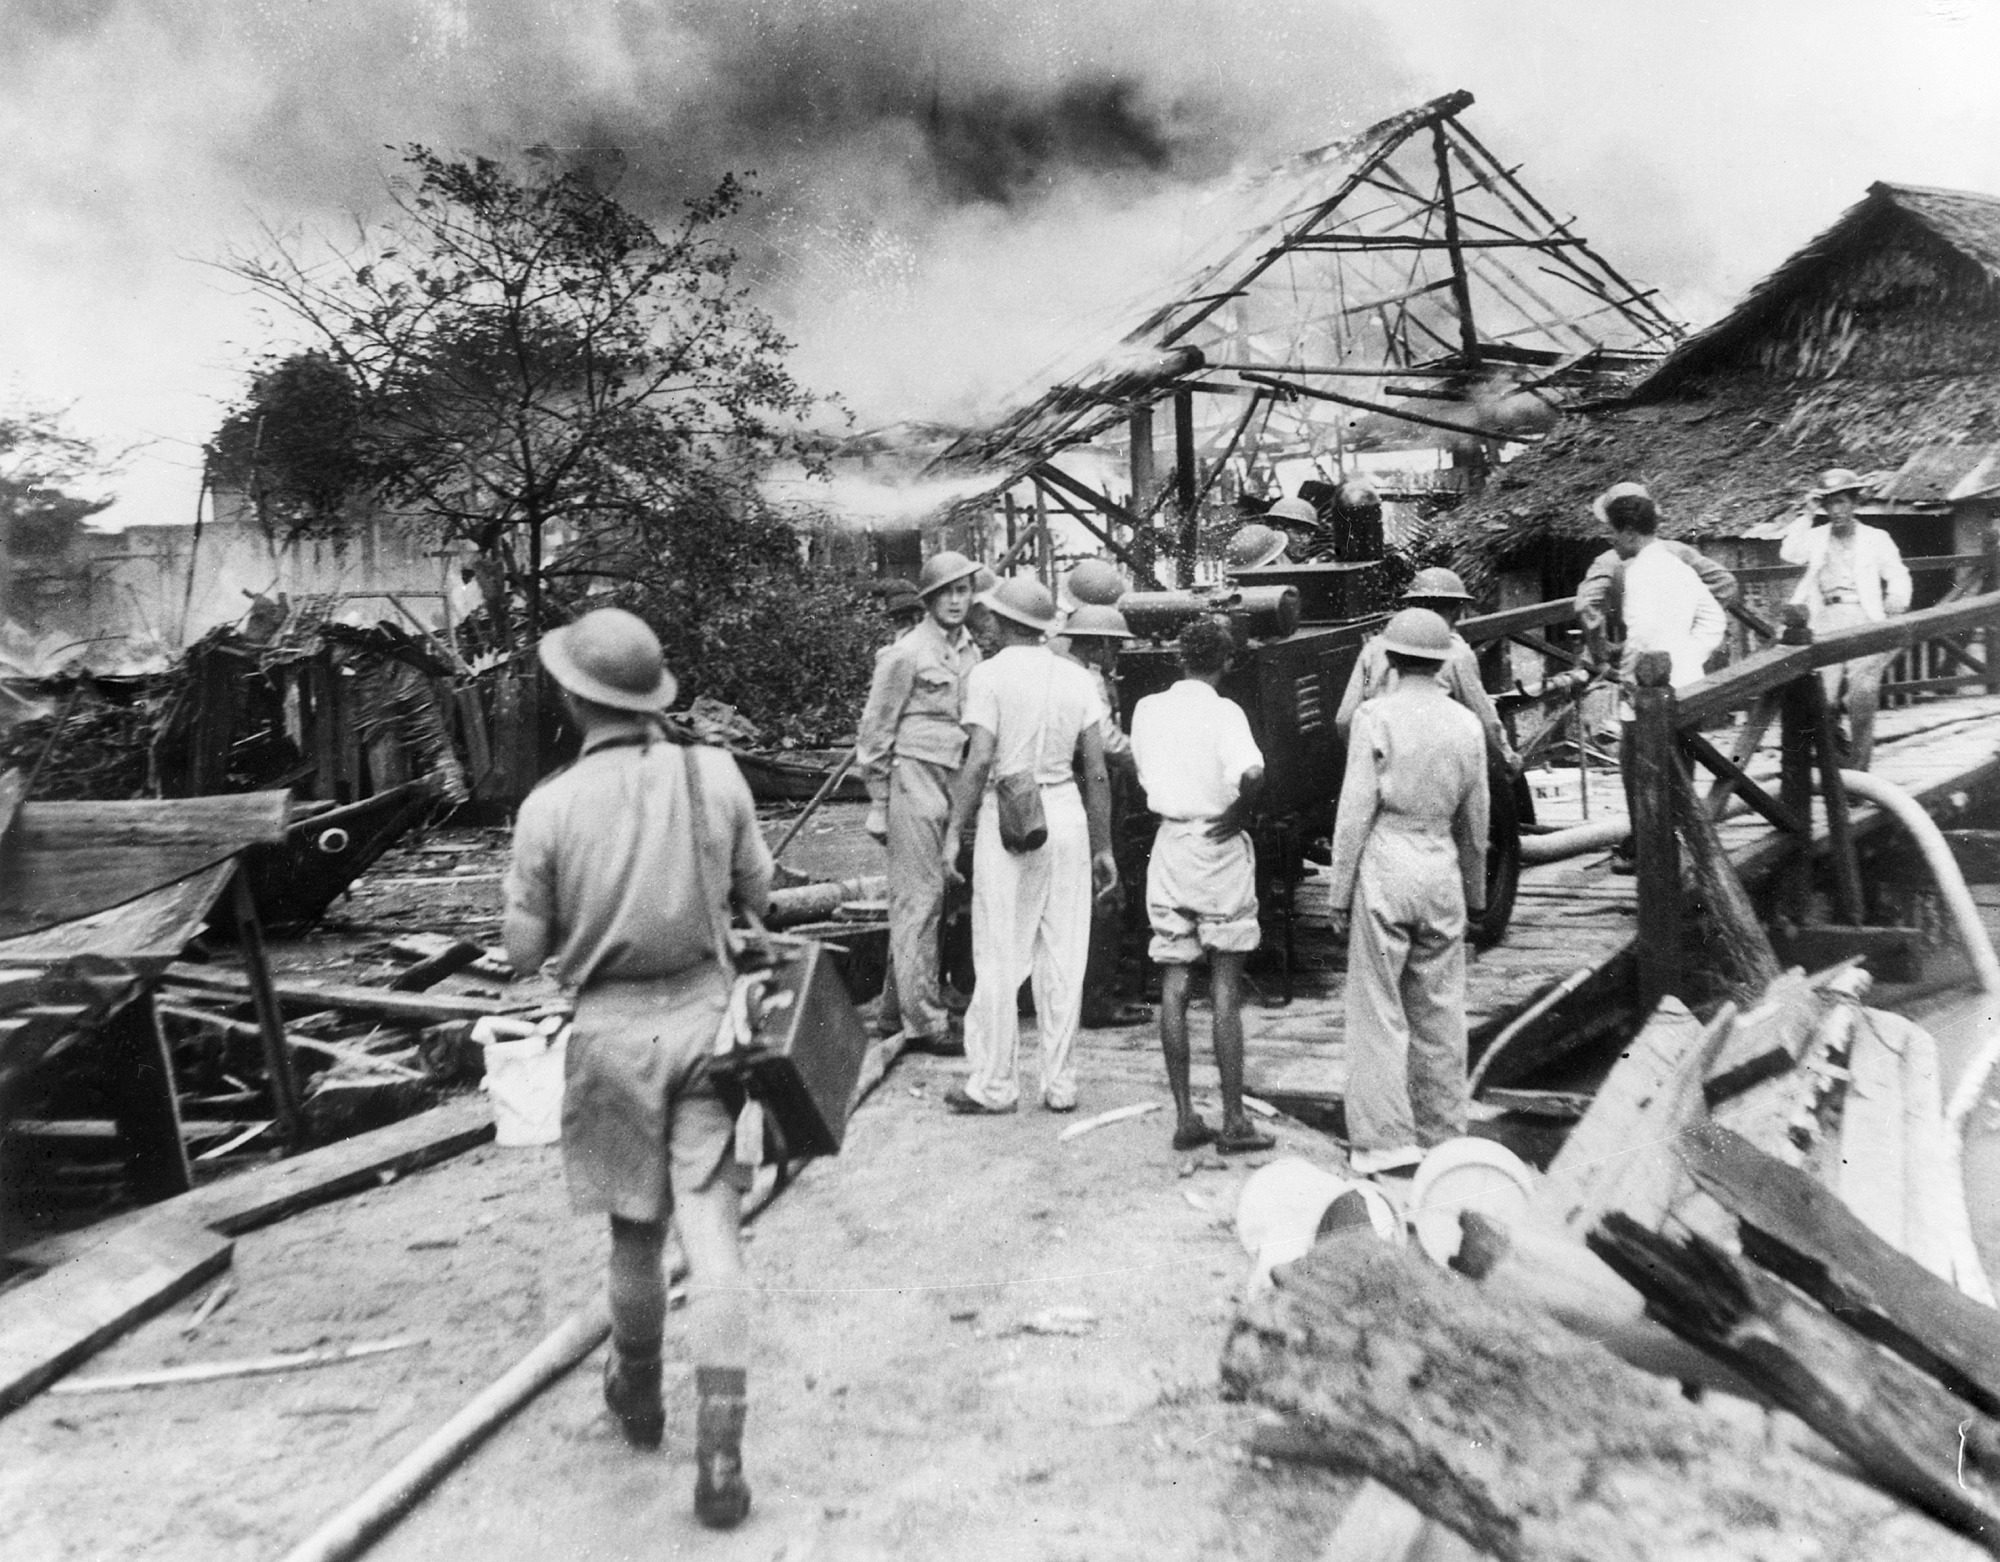 A village in the aftermath of the fall of Singapore, 1942.